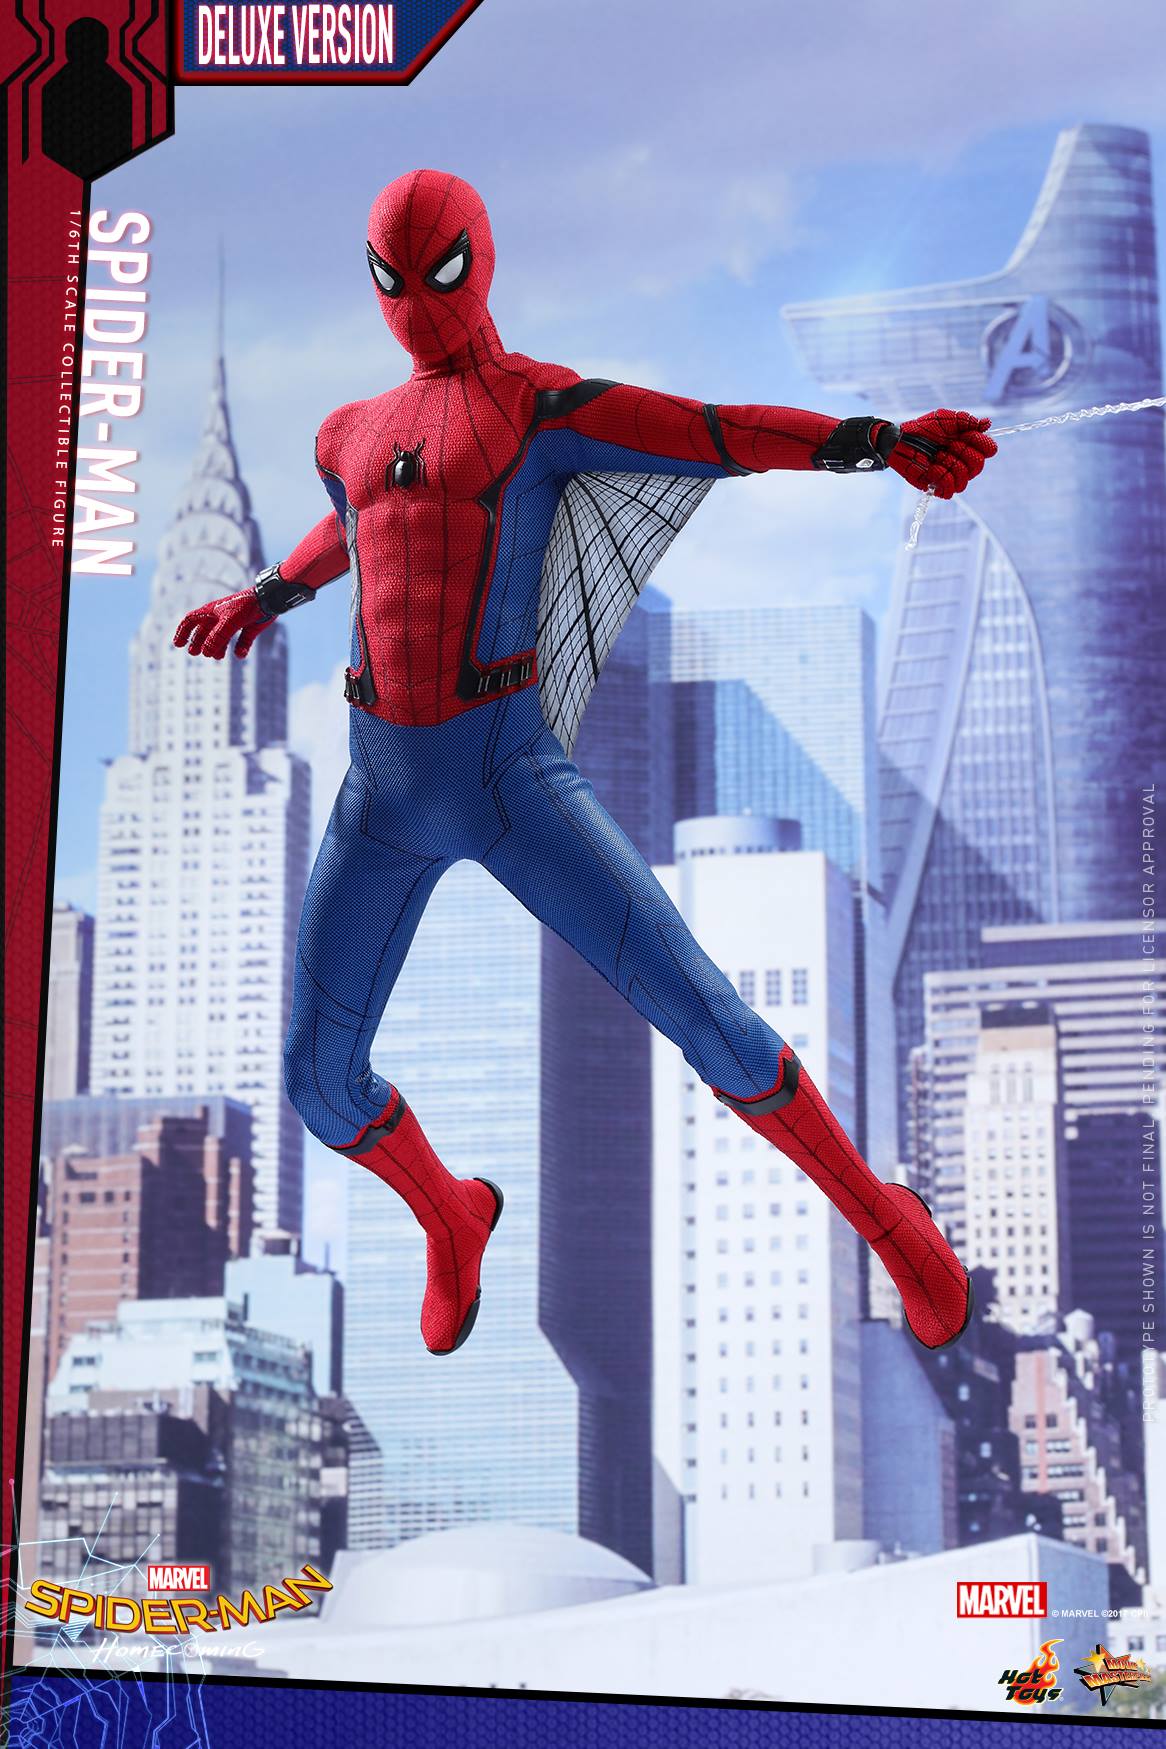 Hot-Toys-Spider-Man-Homecoming-Deluxe-Figure-006.jpg